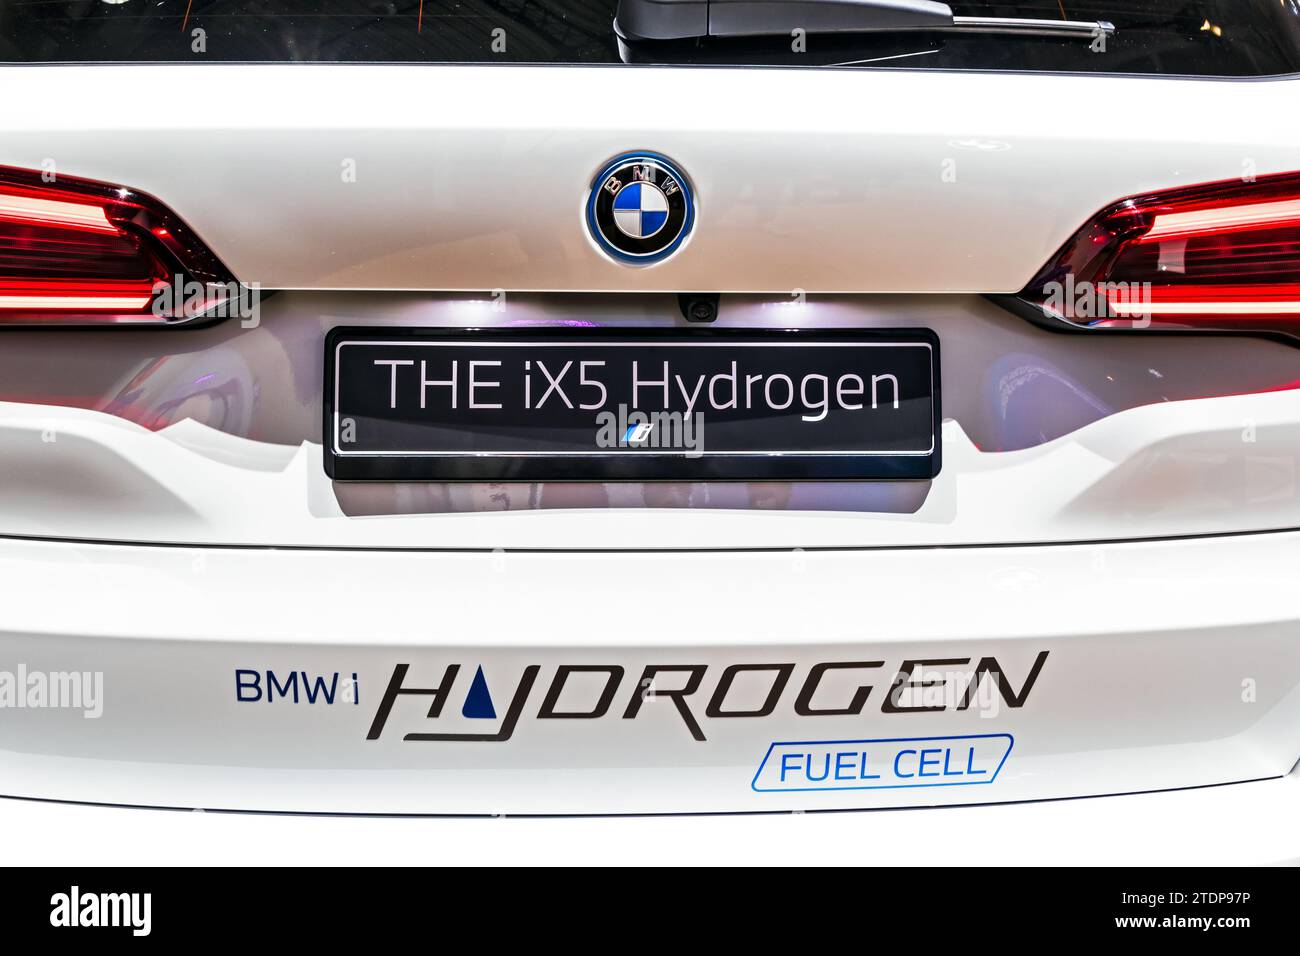 BMW iX5 Hydrogen (G05) full cell car at the IAA Mobility 2021 motor show in Munich, Germany - September 6, 2021. Stock Photo